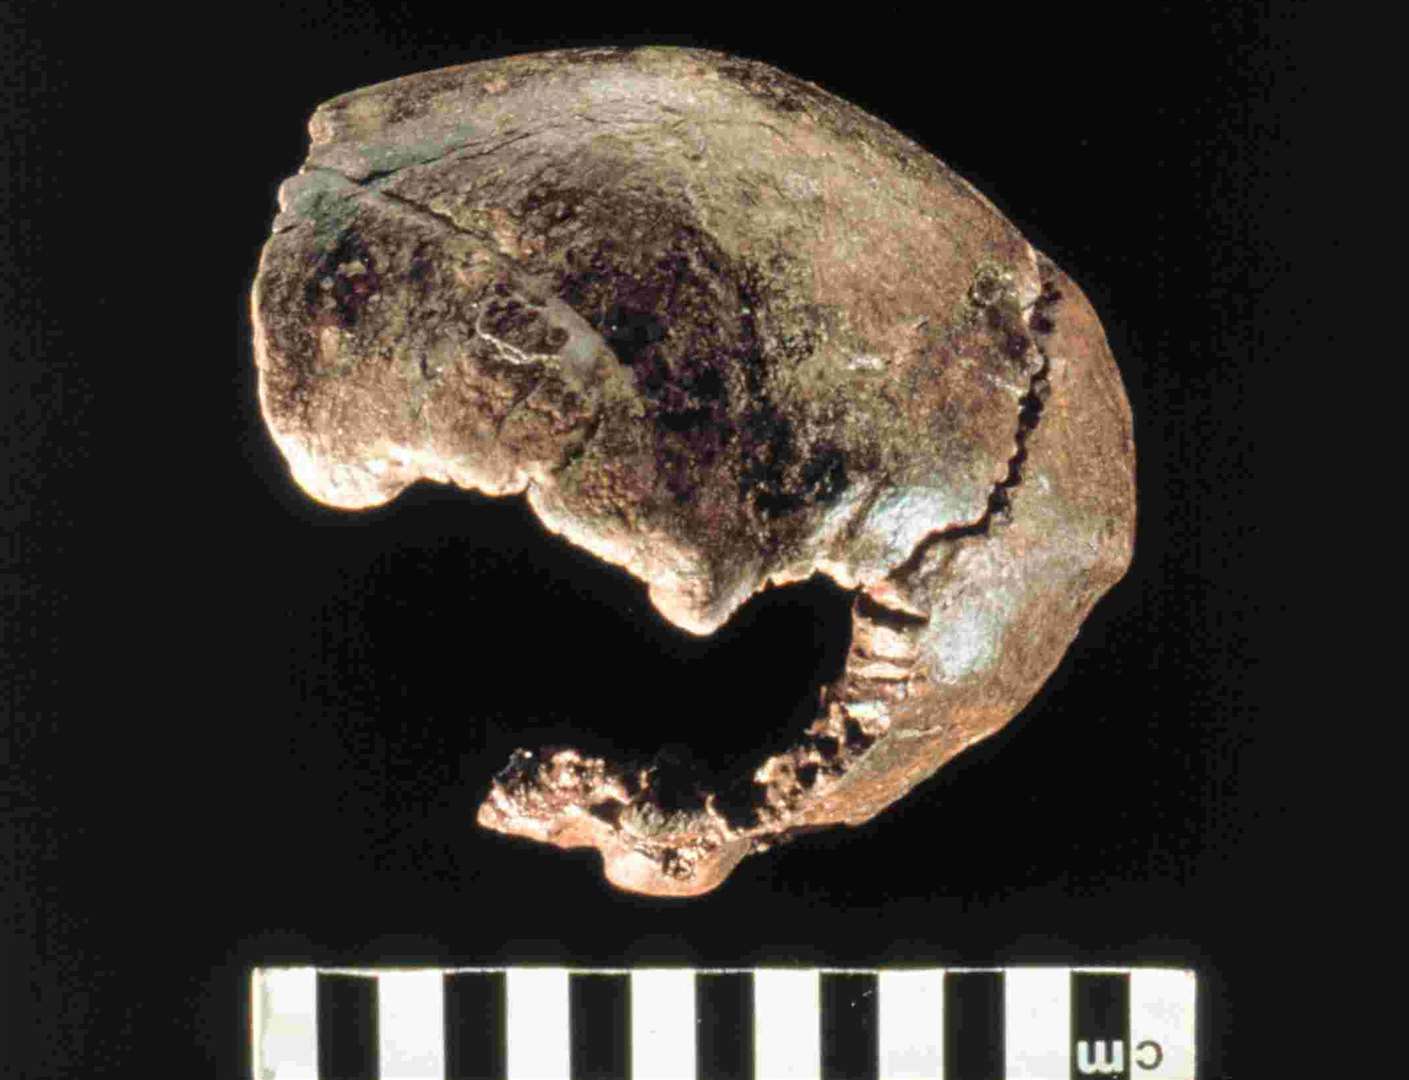 Another angle showing the Swanscombe Skull. Picture: Natural History Museum